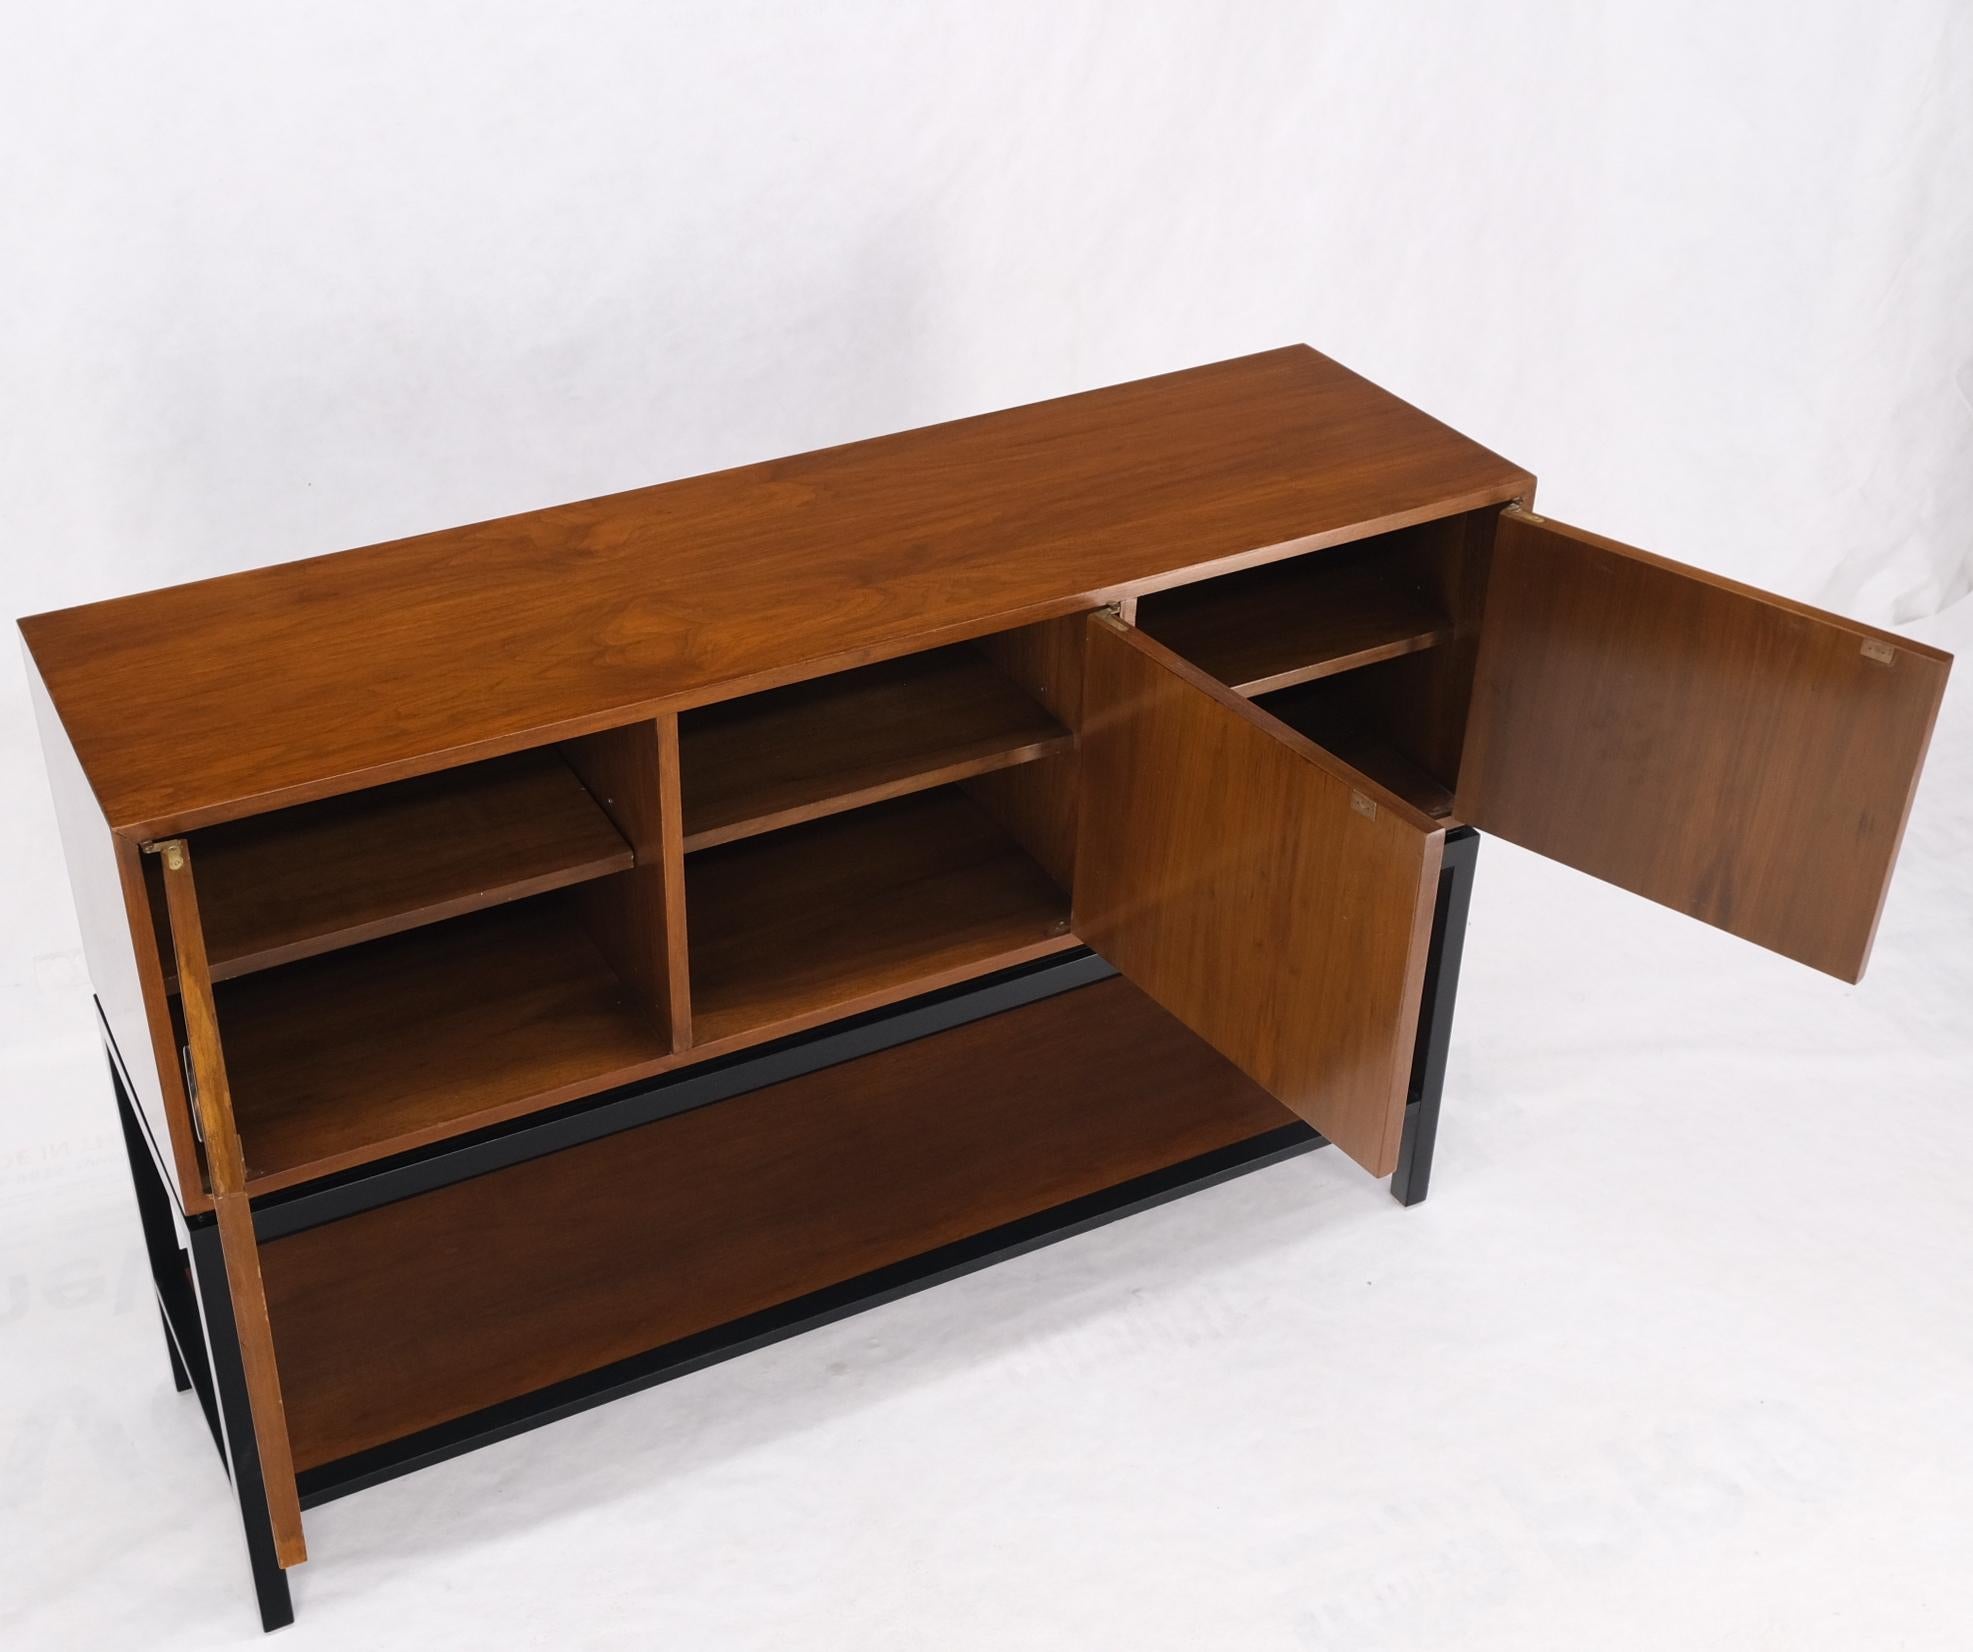 Lacquered Ebonized Base Walnut Three Doors Mid-Century Modern Credenza Console Cabinet For Sale